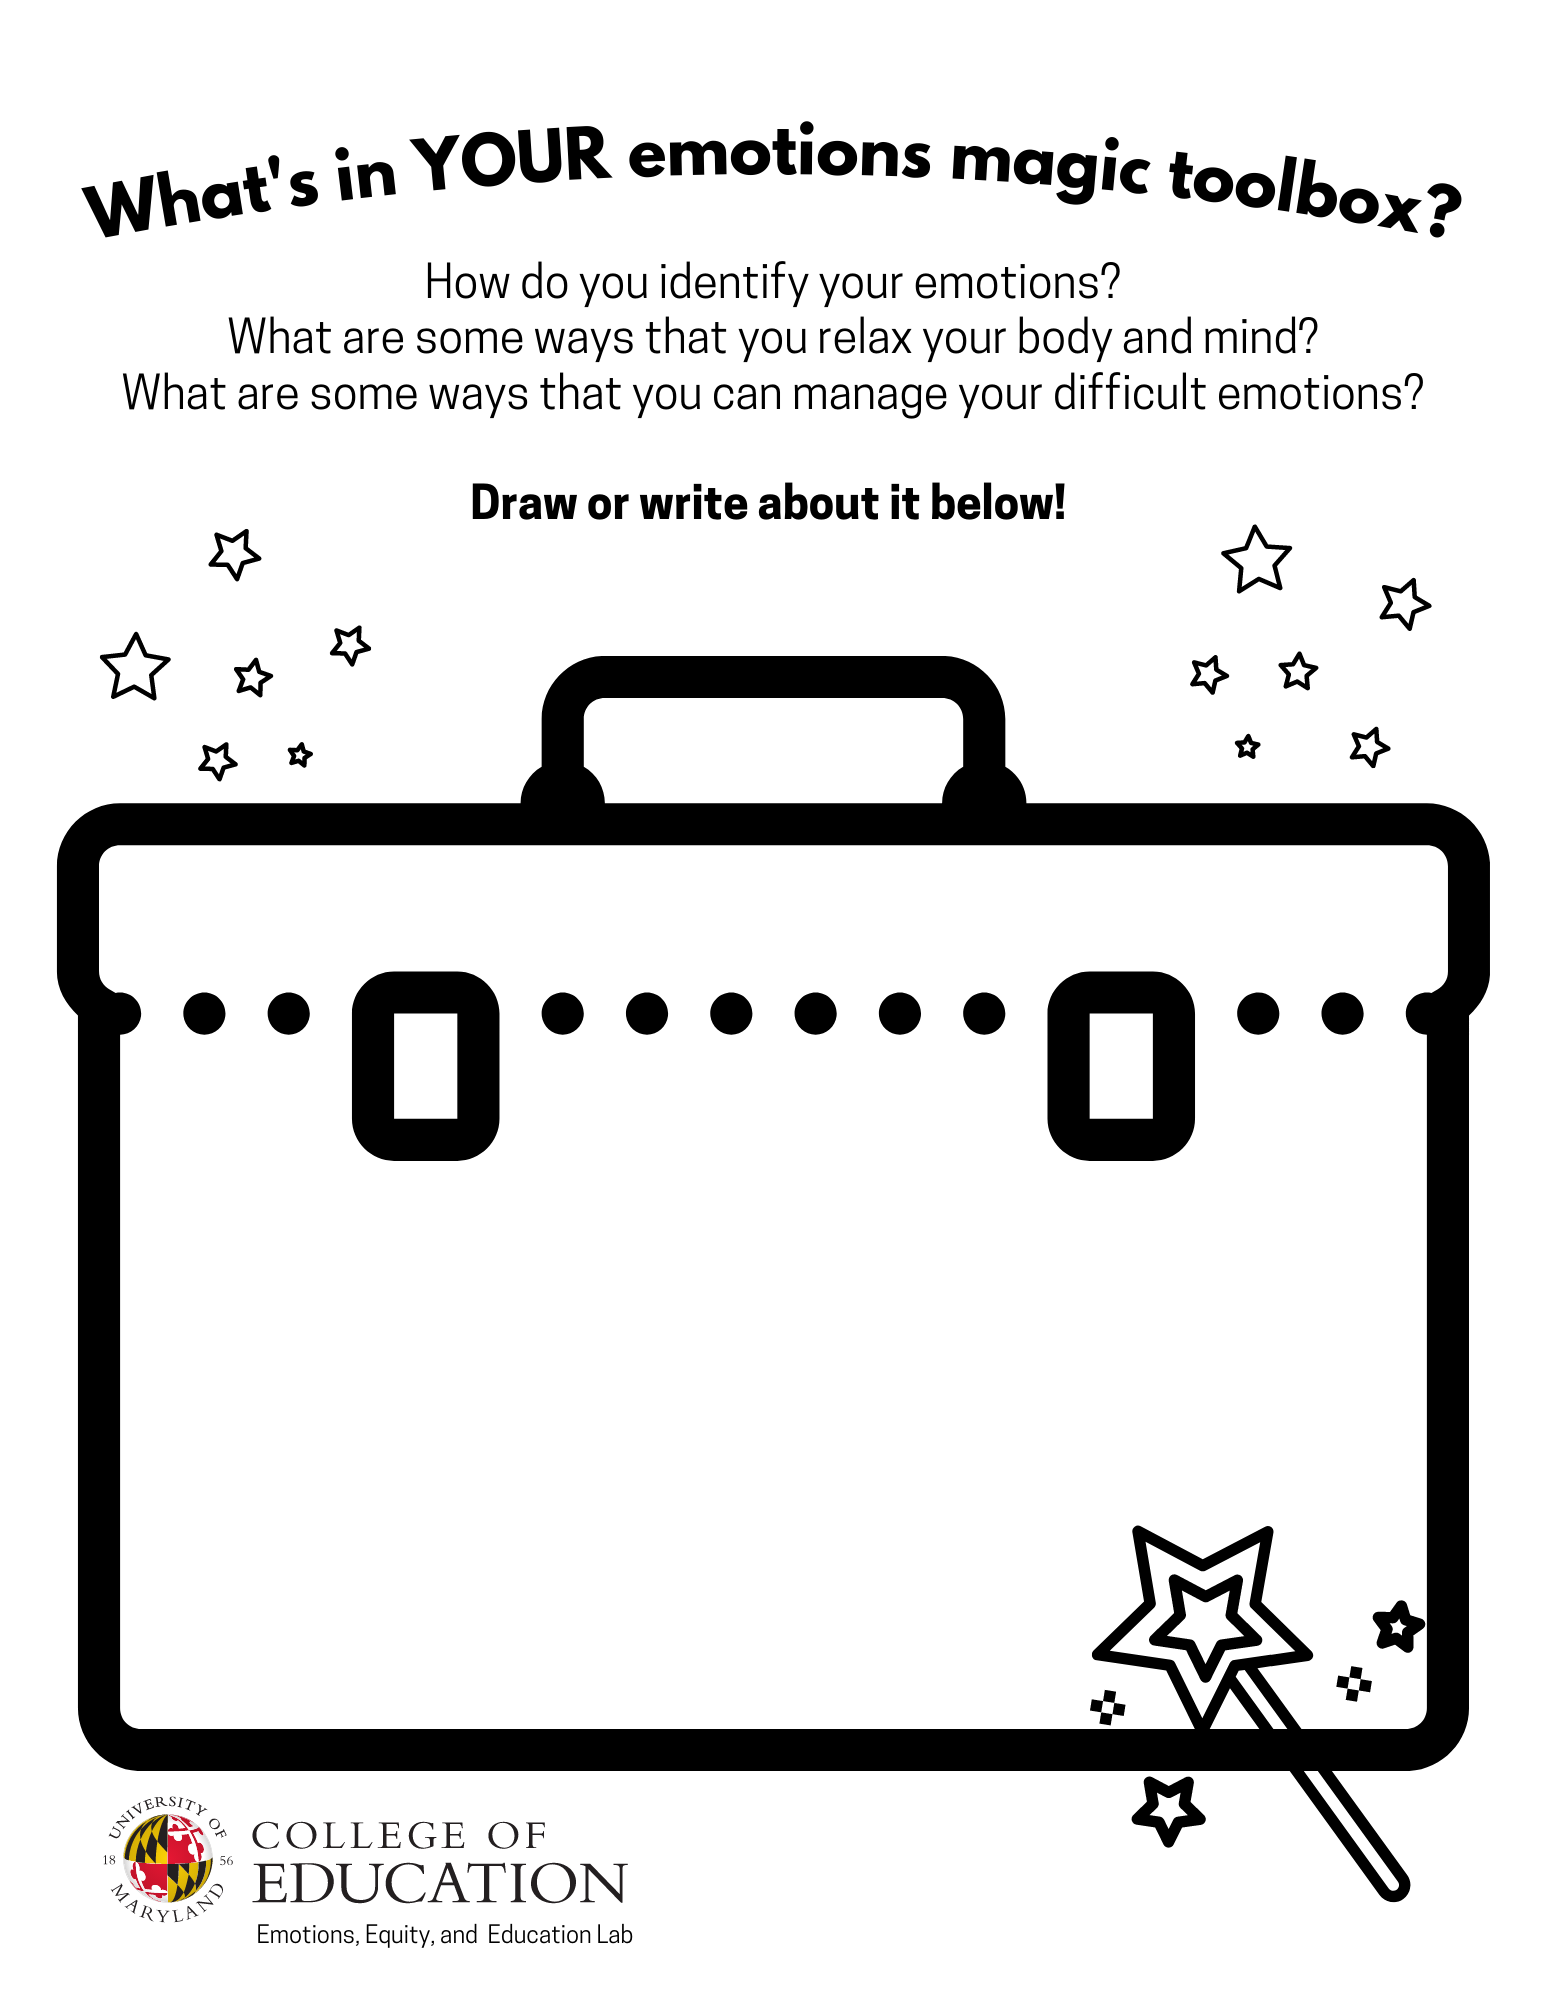 Coloring sheet with a toolbox that asks "what's in your toolbox."